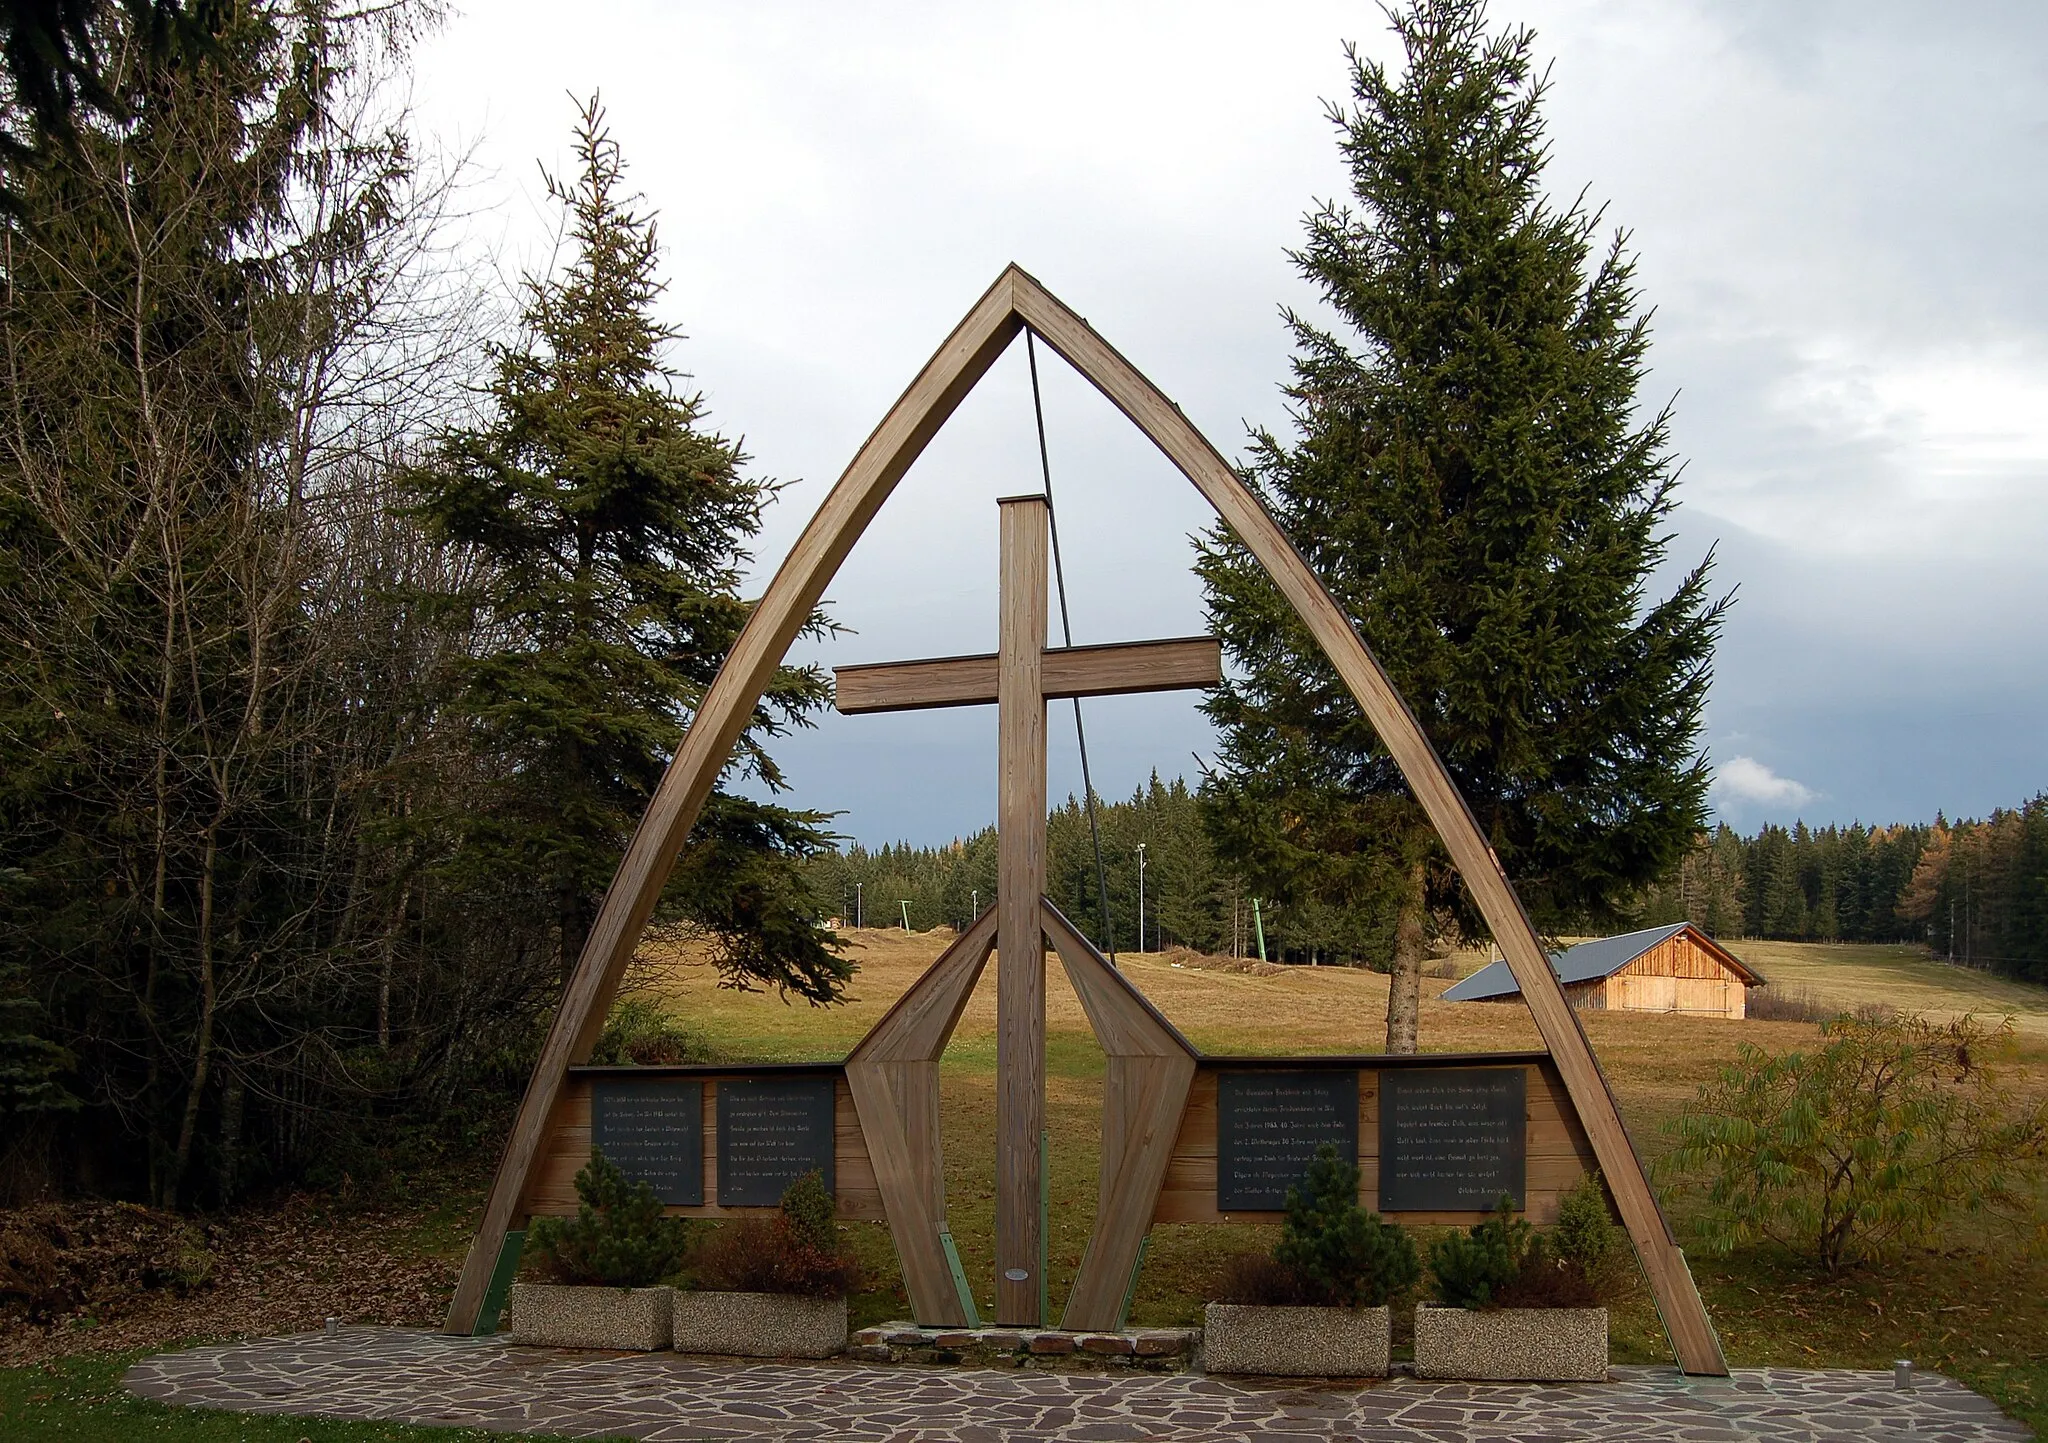 Photo showing: The Friedenskreuz (peace cross) at the Schanzsattel, a mountain pass in Styria, Austria. Built in 1985.